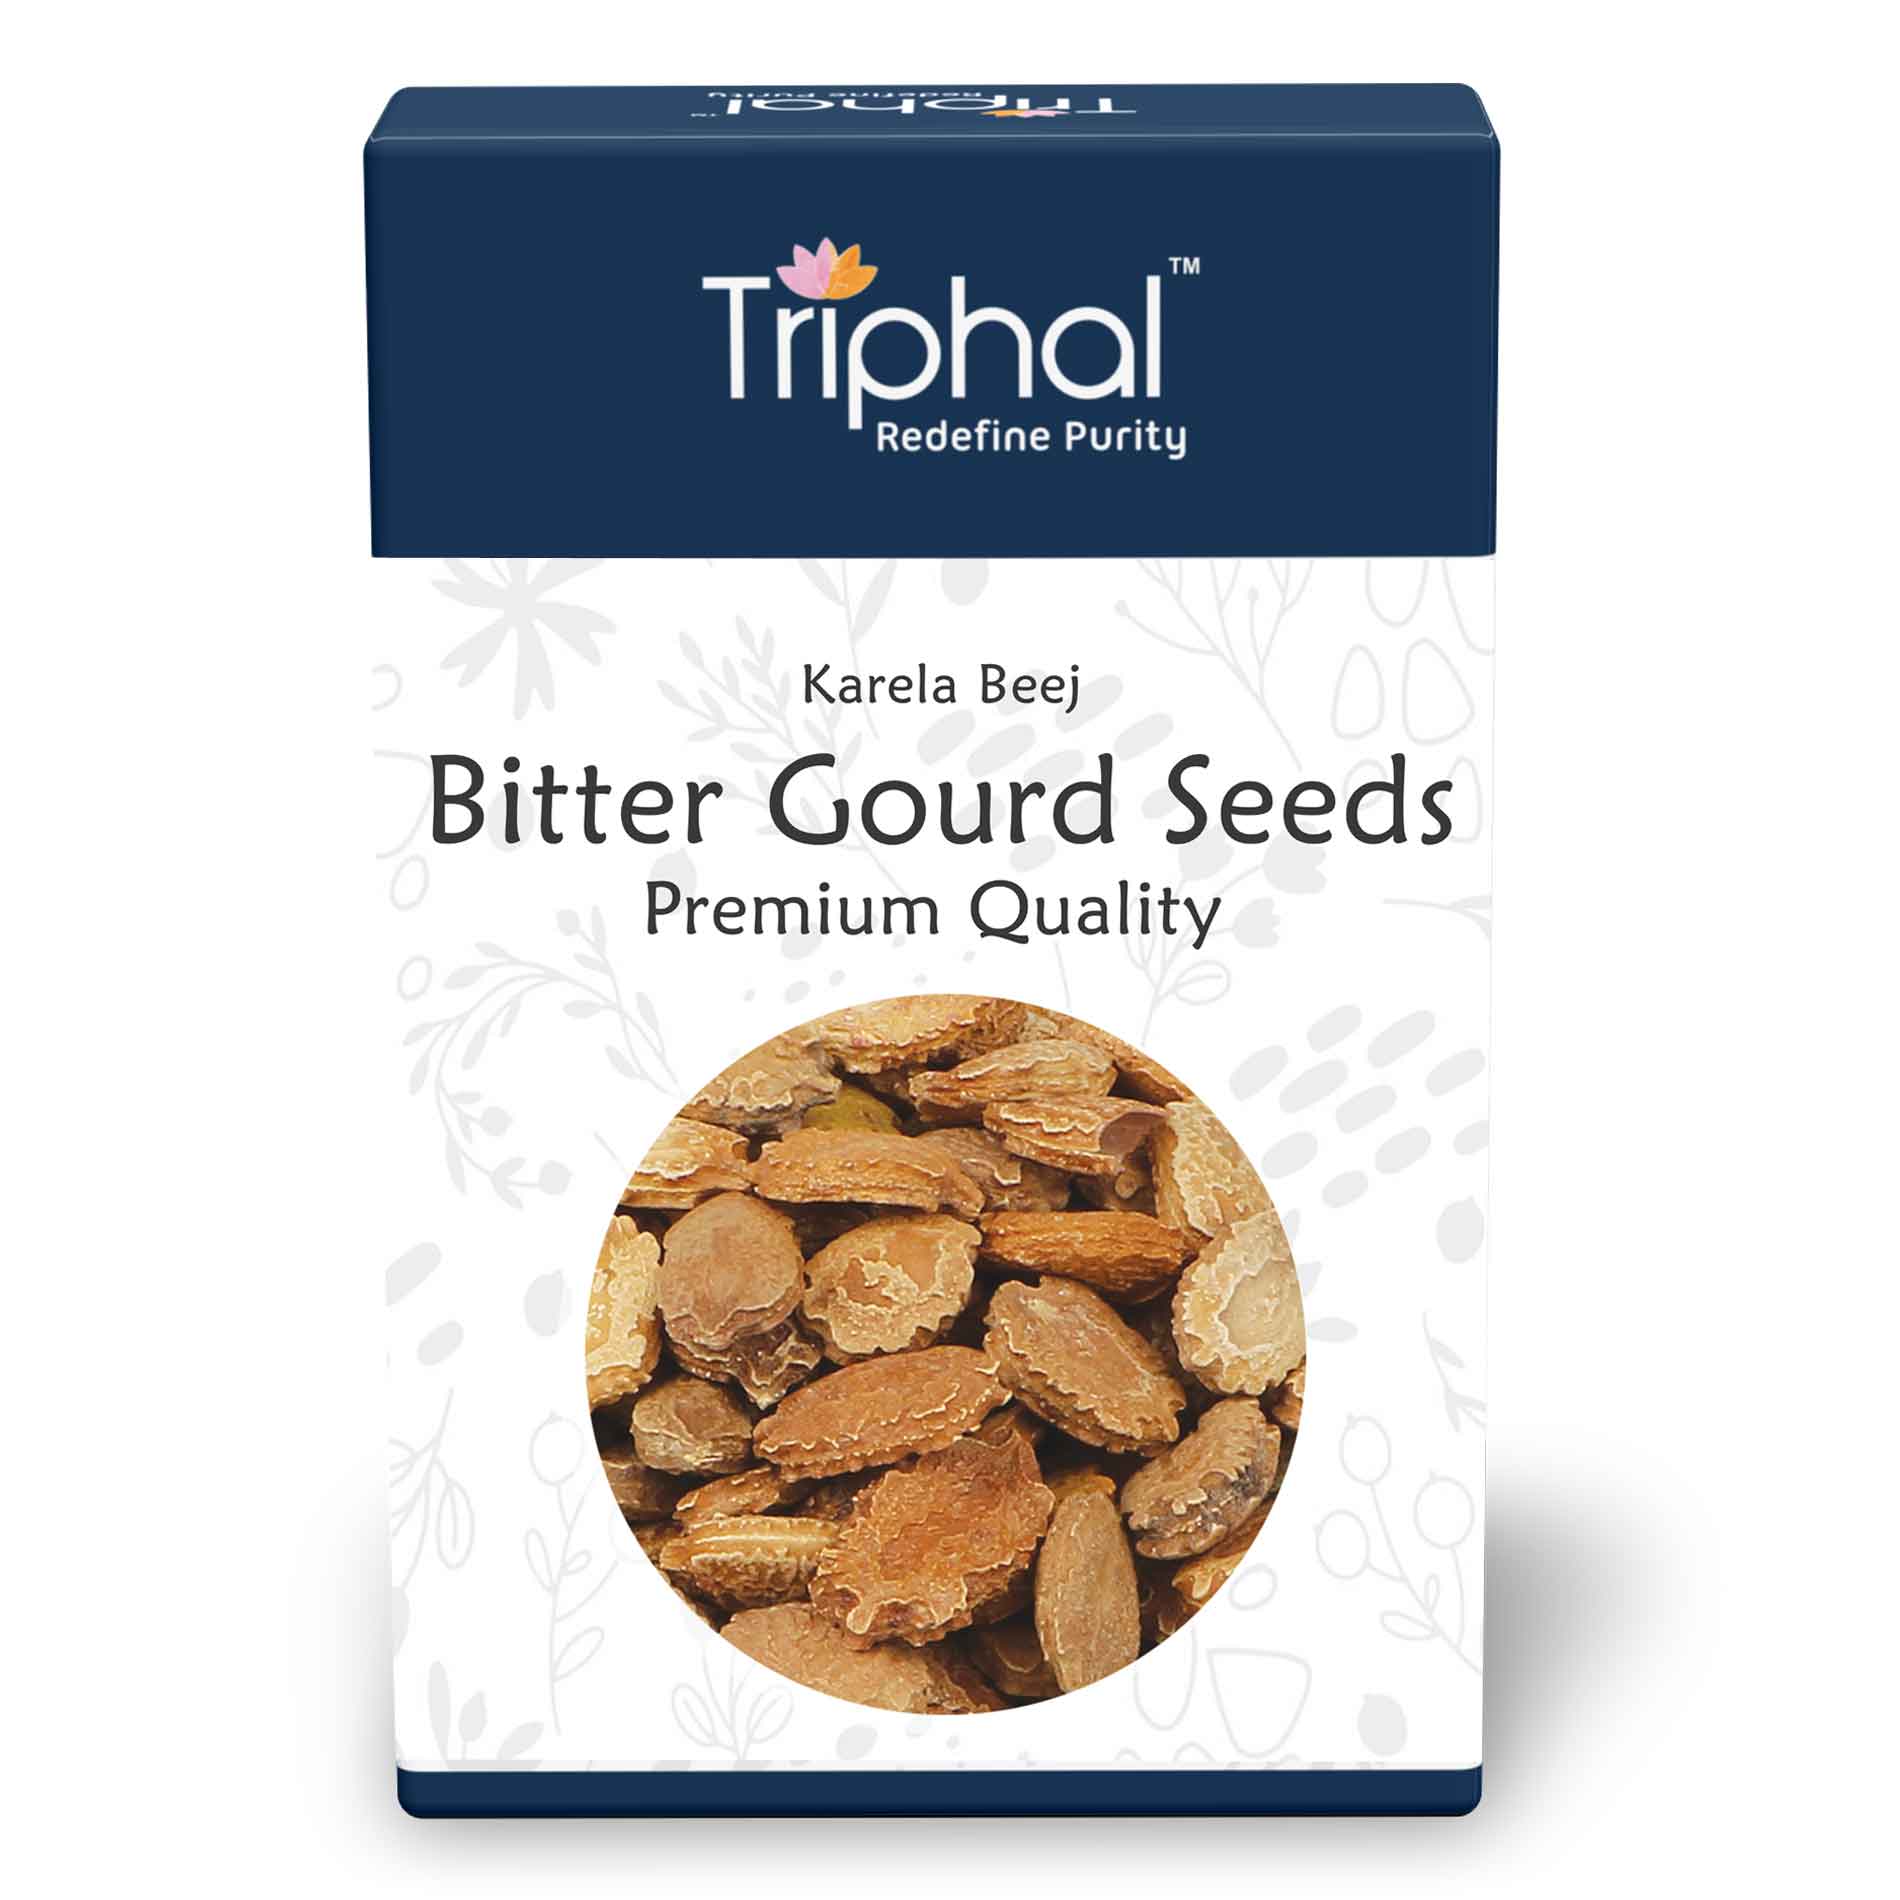 Original and Pure Bitter gourd seeds or Karela Beej by Triphal. No Adulteration